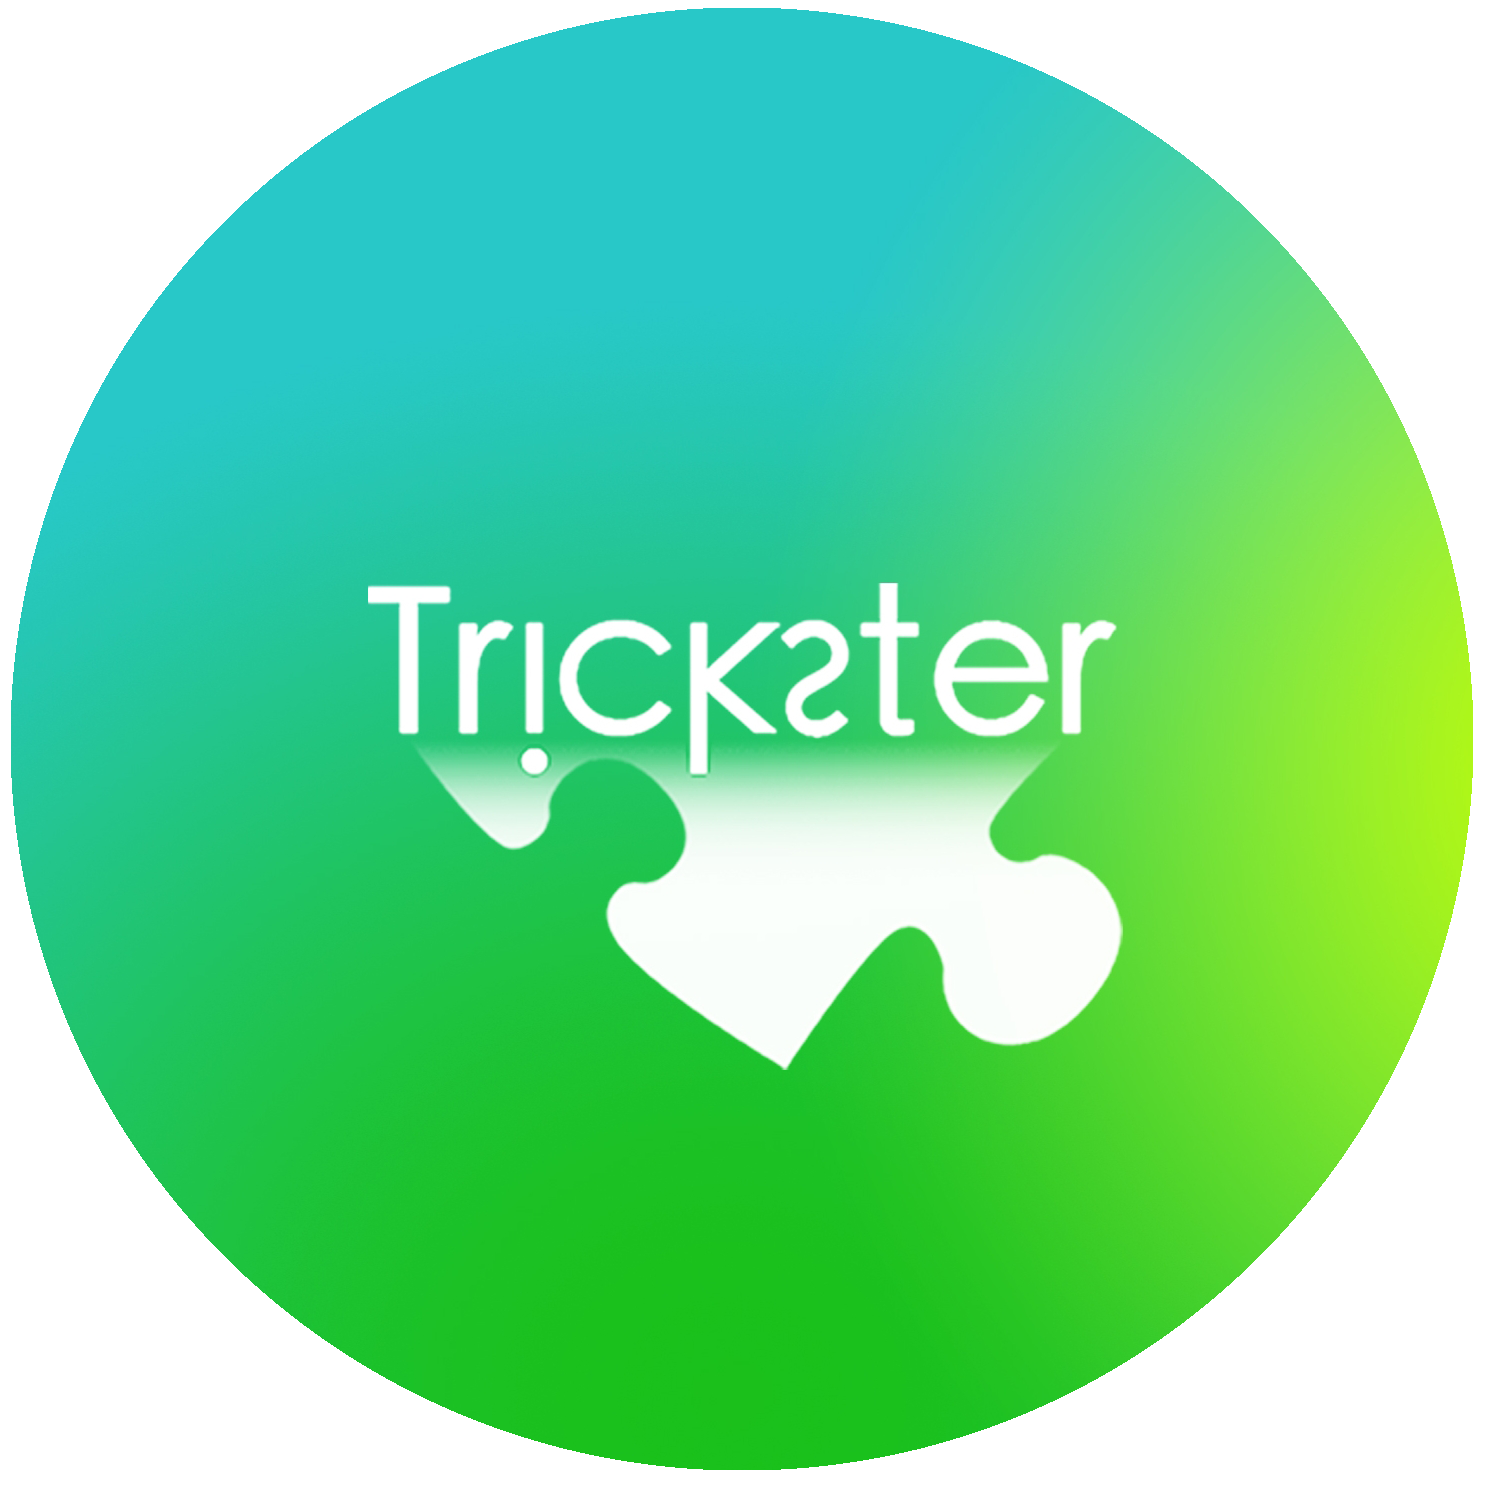 Trickster - Games for The Curious